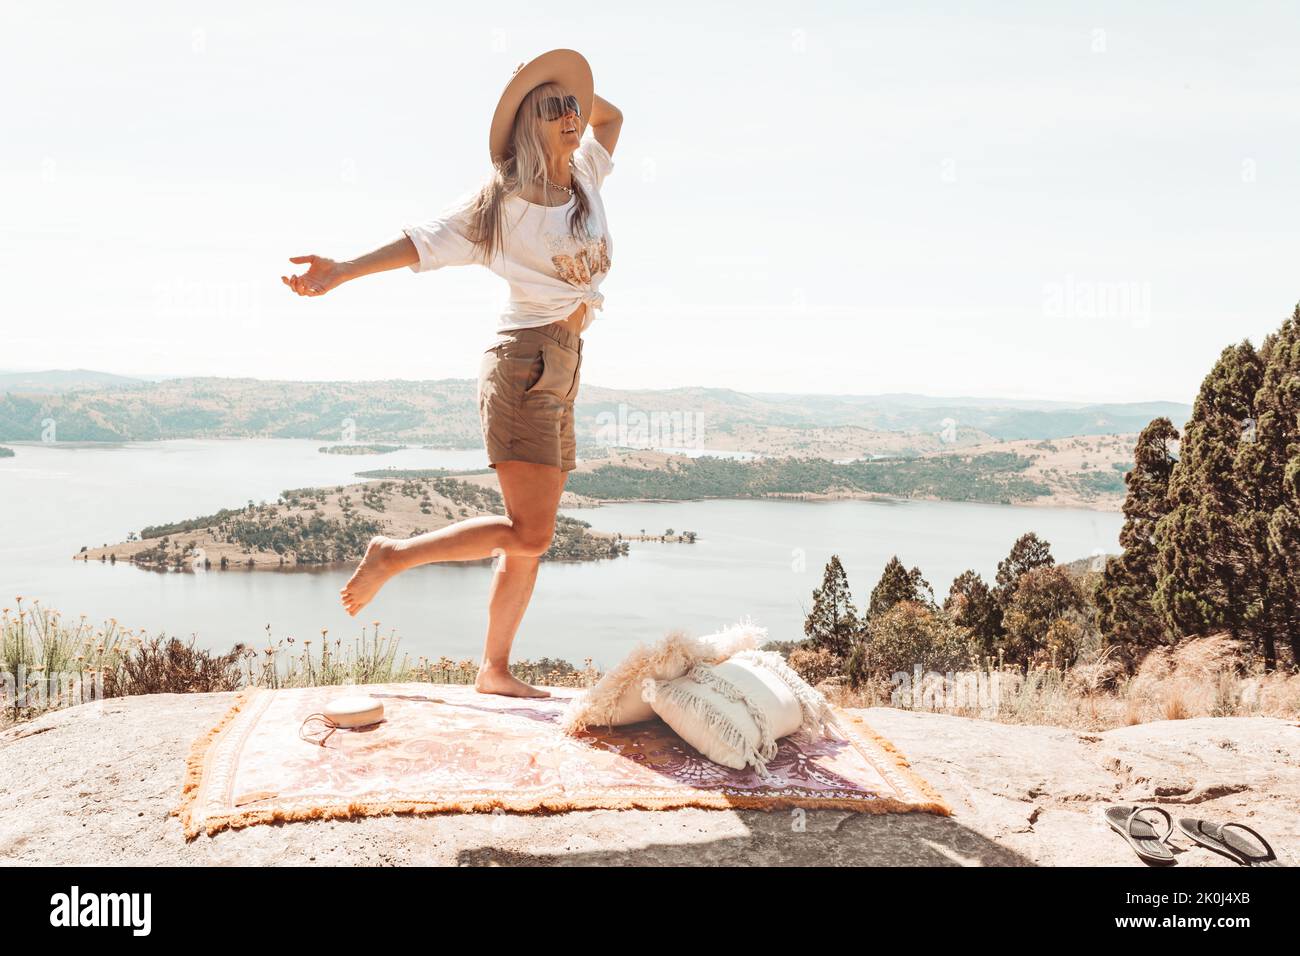 Happy exuberant woman dancing high on a rocky outcrop with views over waterways Stock Photo